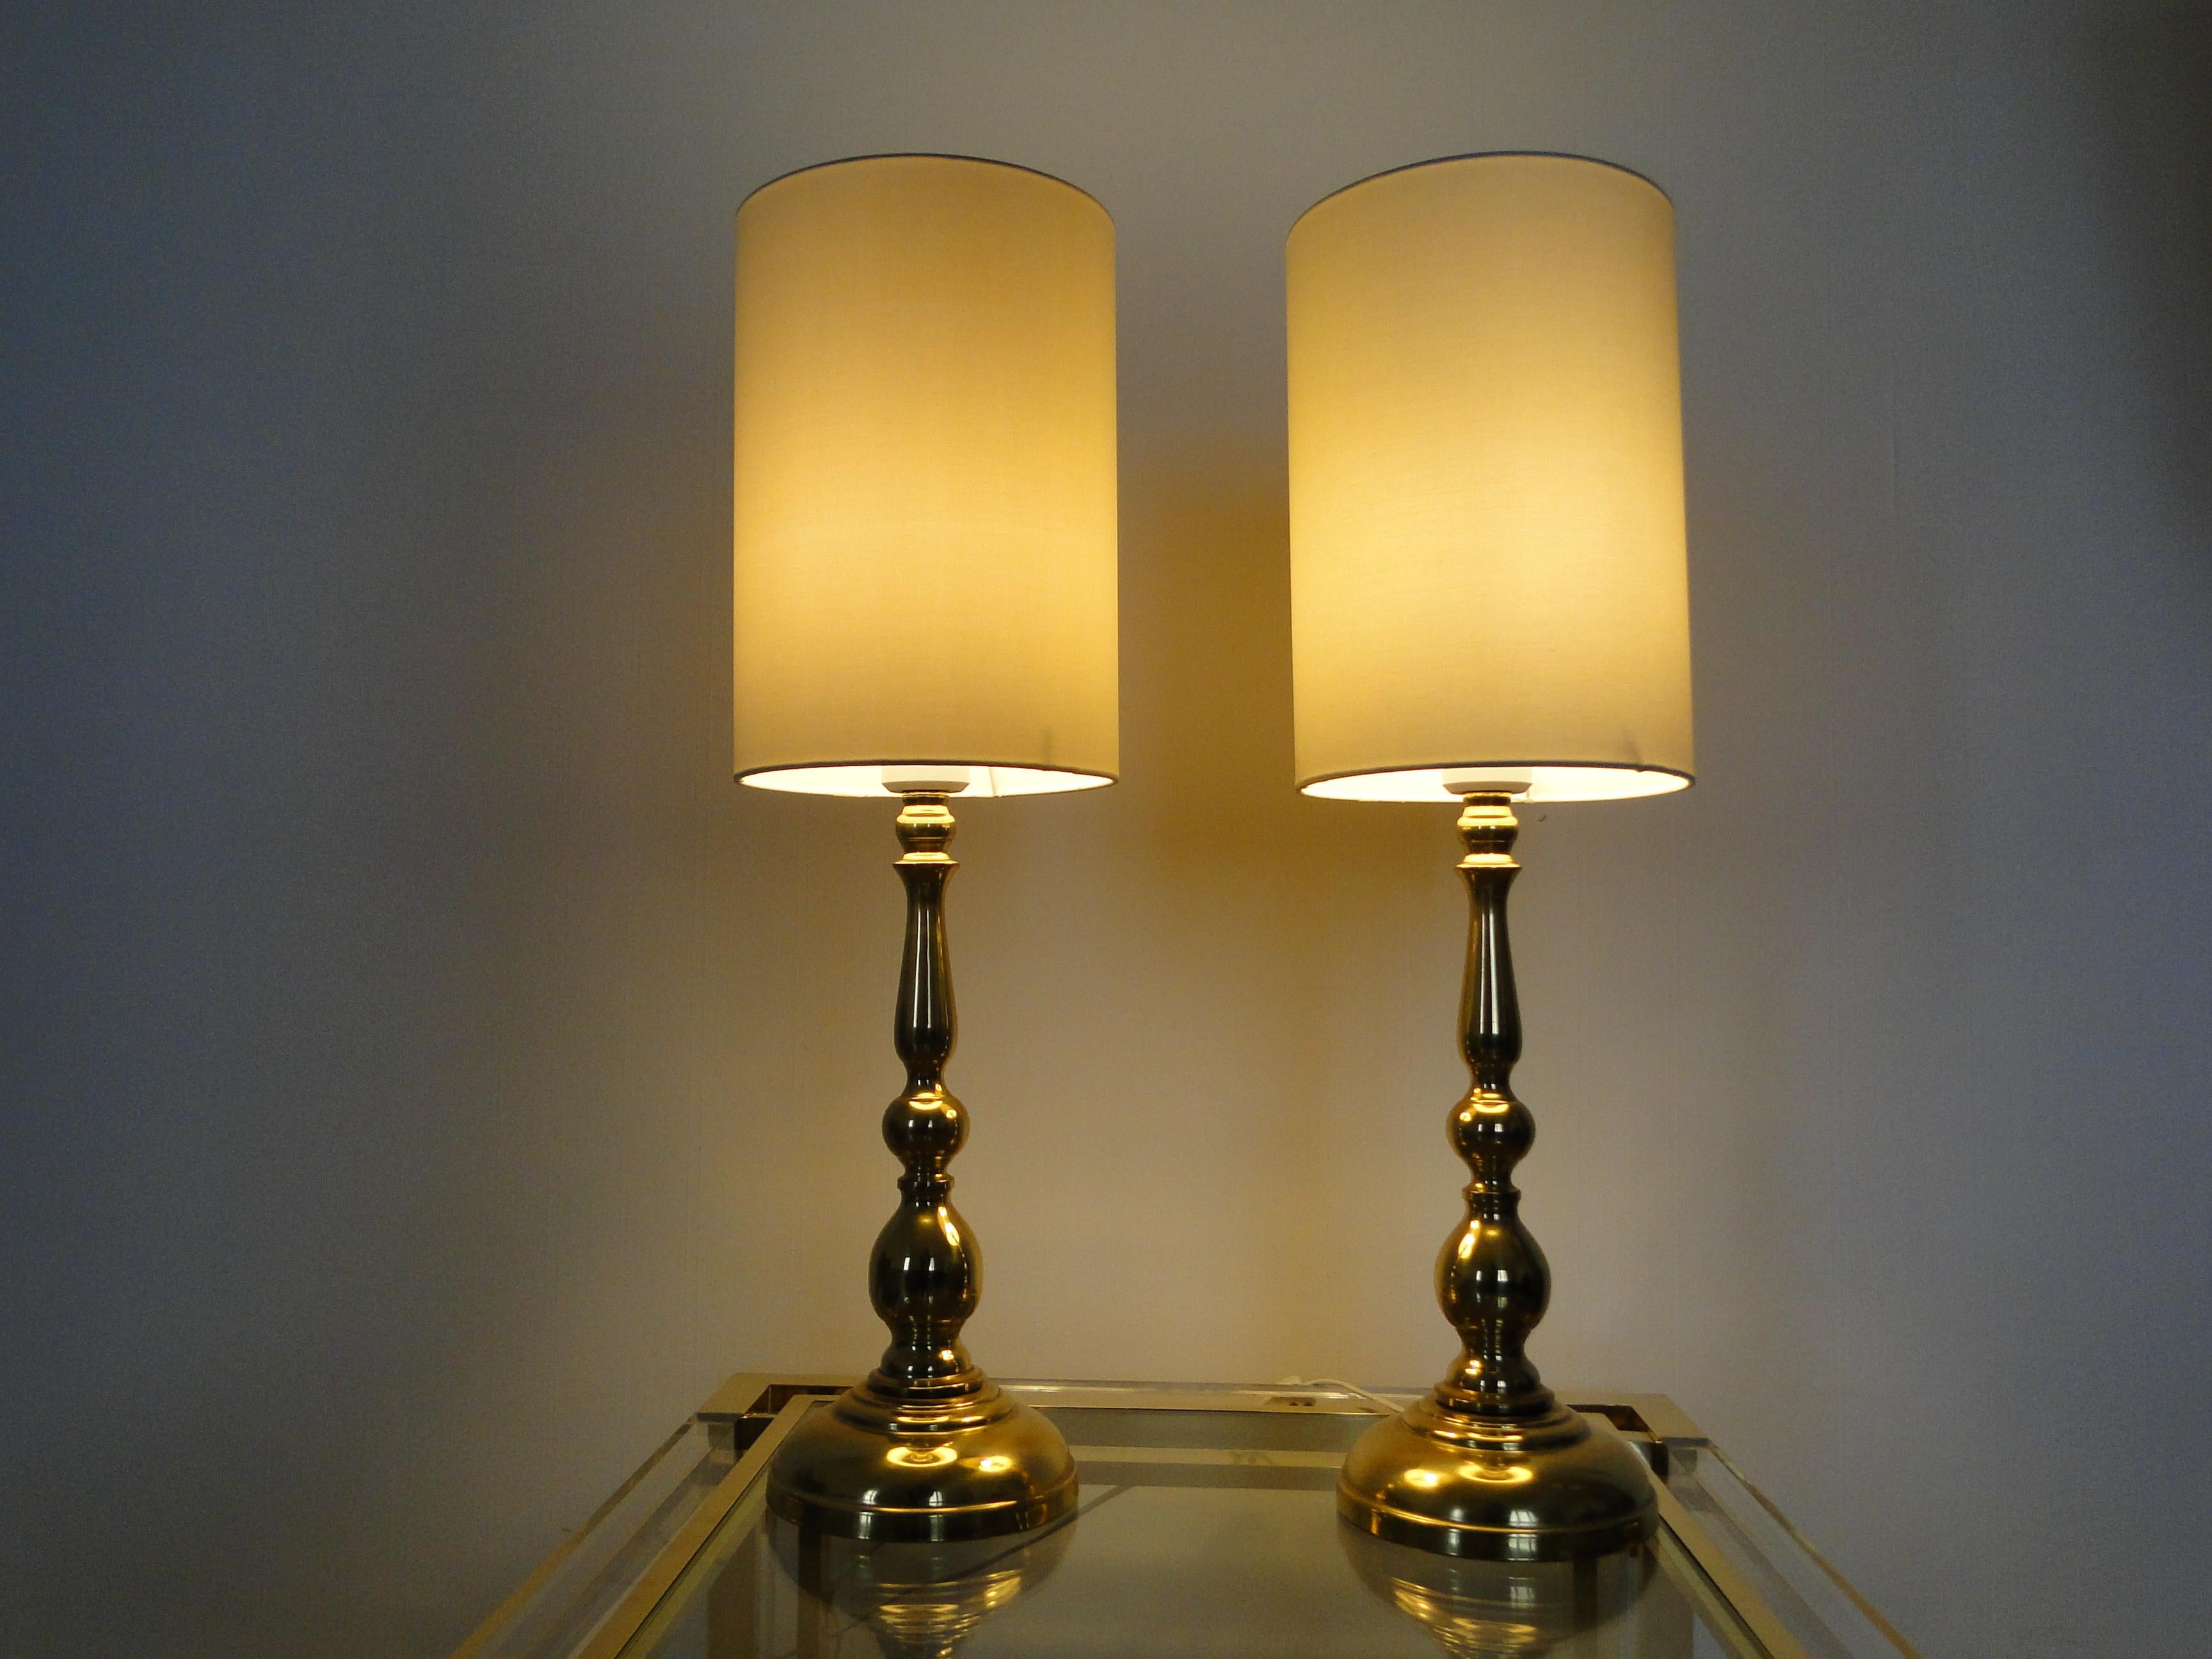 Magnificent pair of Scandinavian brass lamps from the 1960s.
These mid-century bulbous shaped lamps have a polished brass body and candelabra design.

Very good condition

Measures : . Total height with lampshade: 67 cm (26.38 in)
Height without